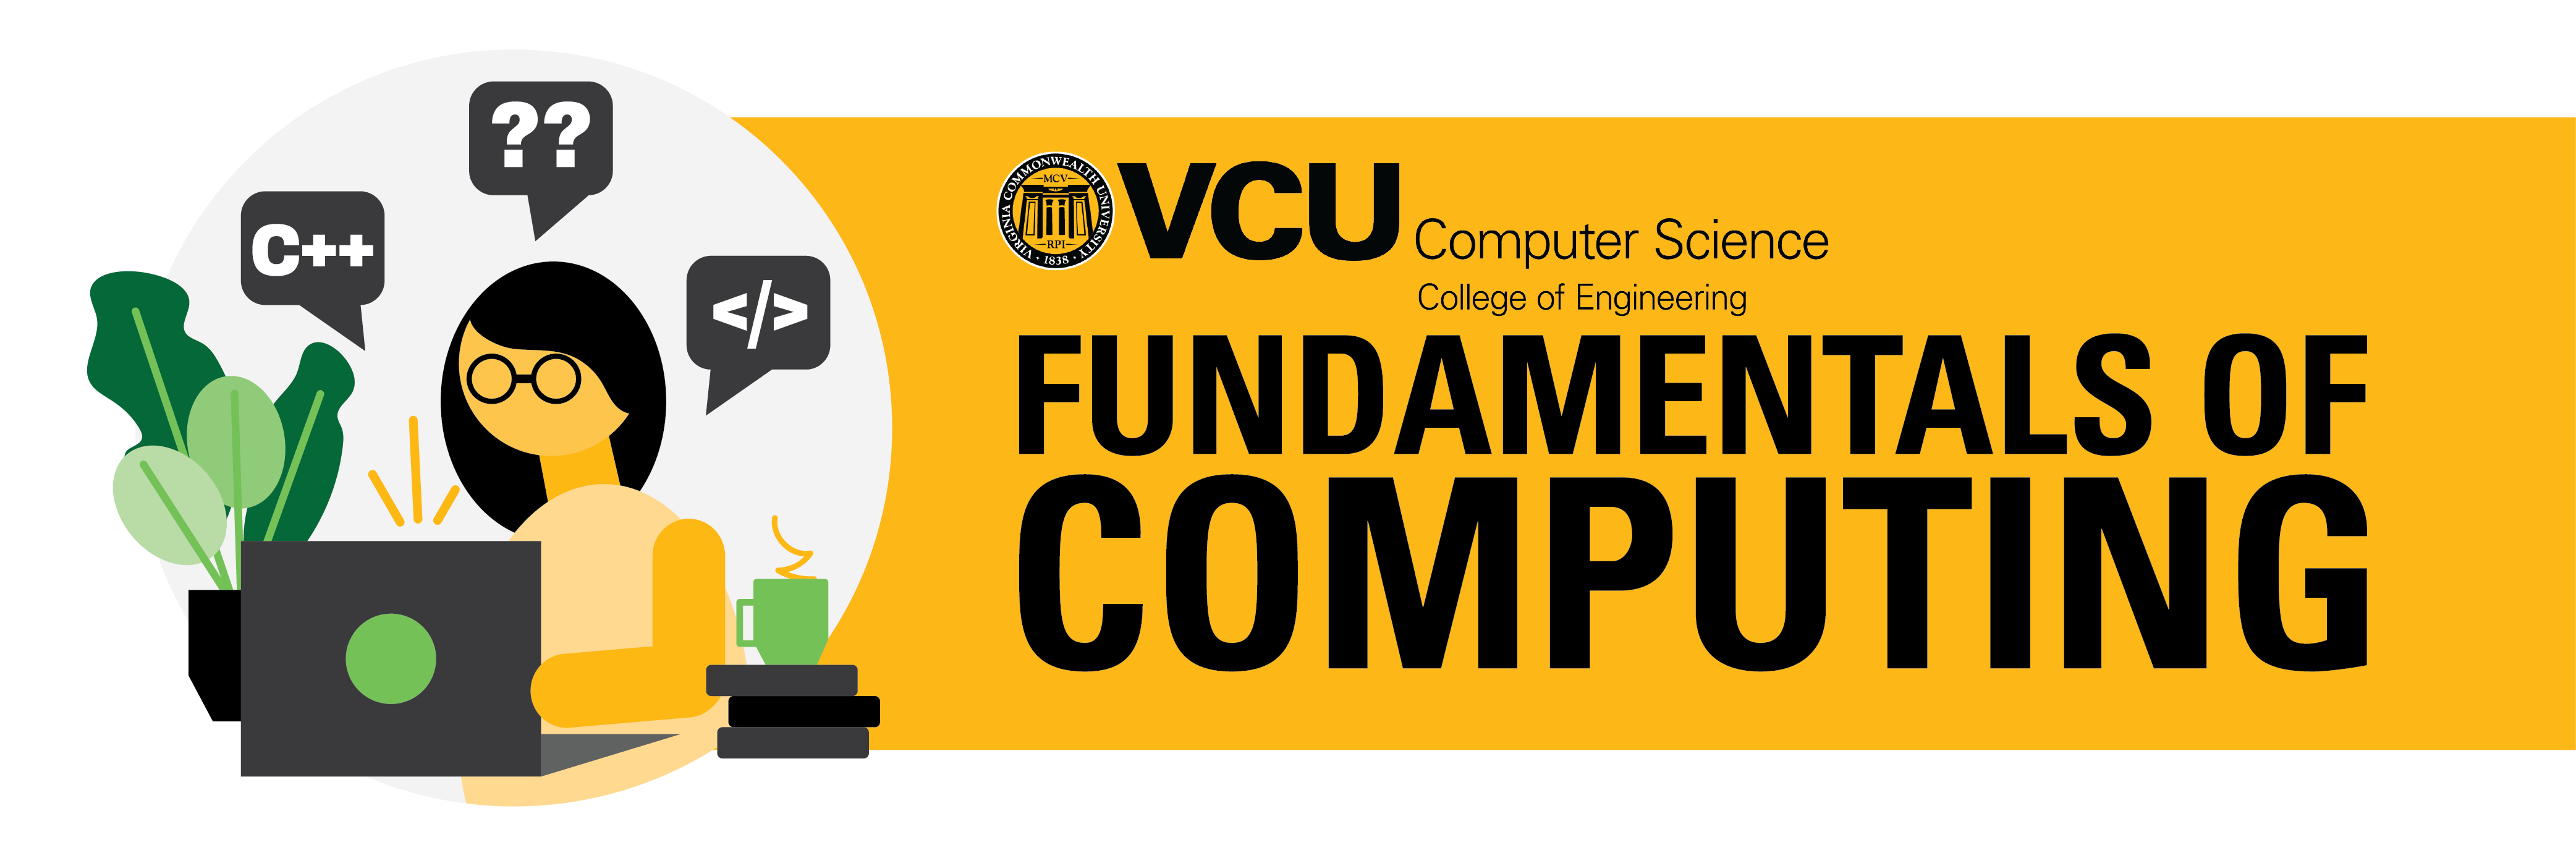 Illustration for the VCU College of Engineering Fundamentals of Computing specialization with character on a computer and the icons for C++ Web Development and Security